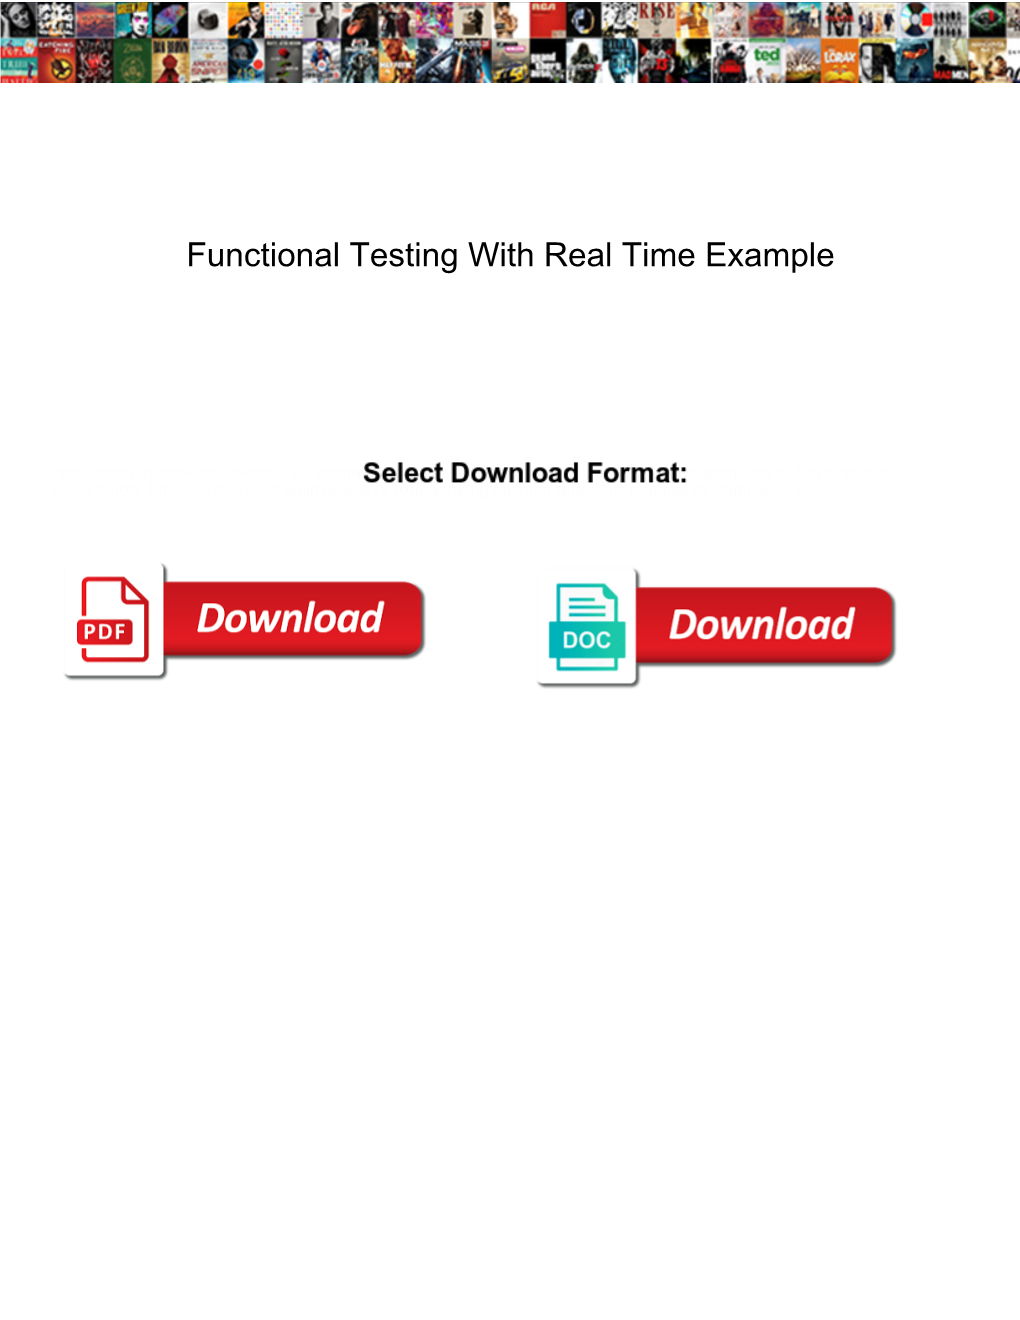 Functional Testing with Real Time Example